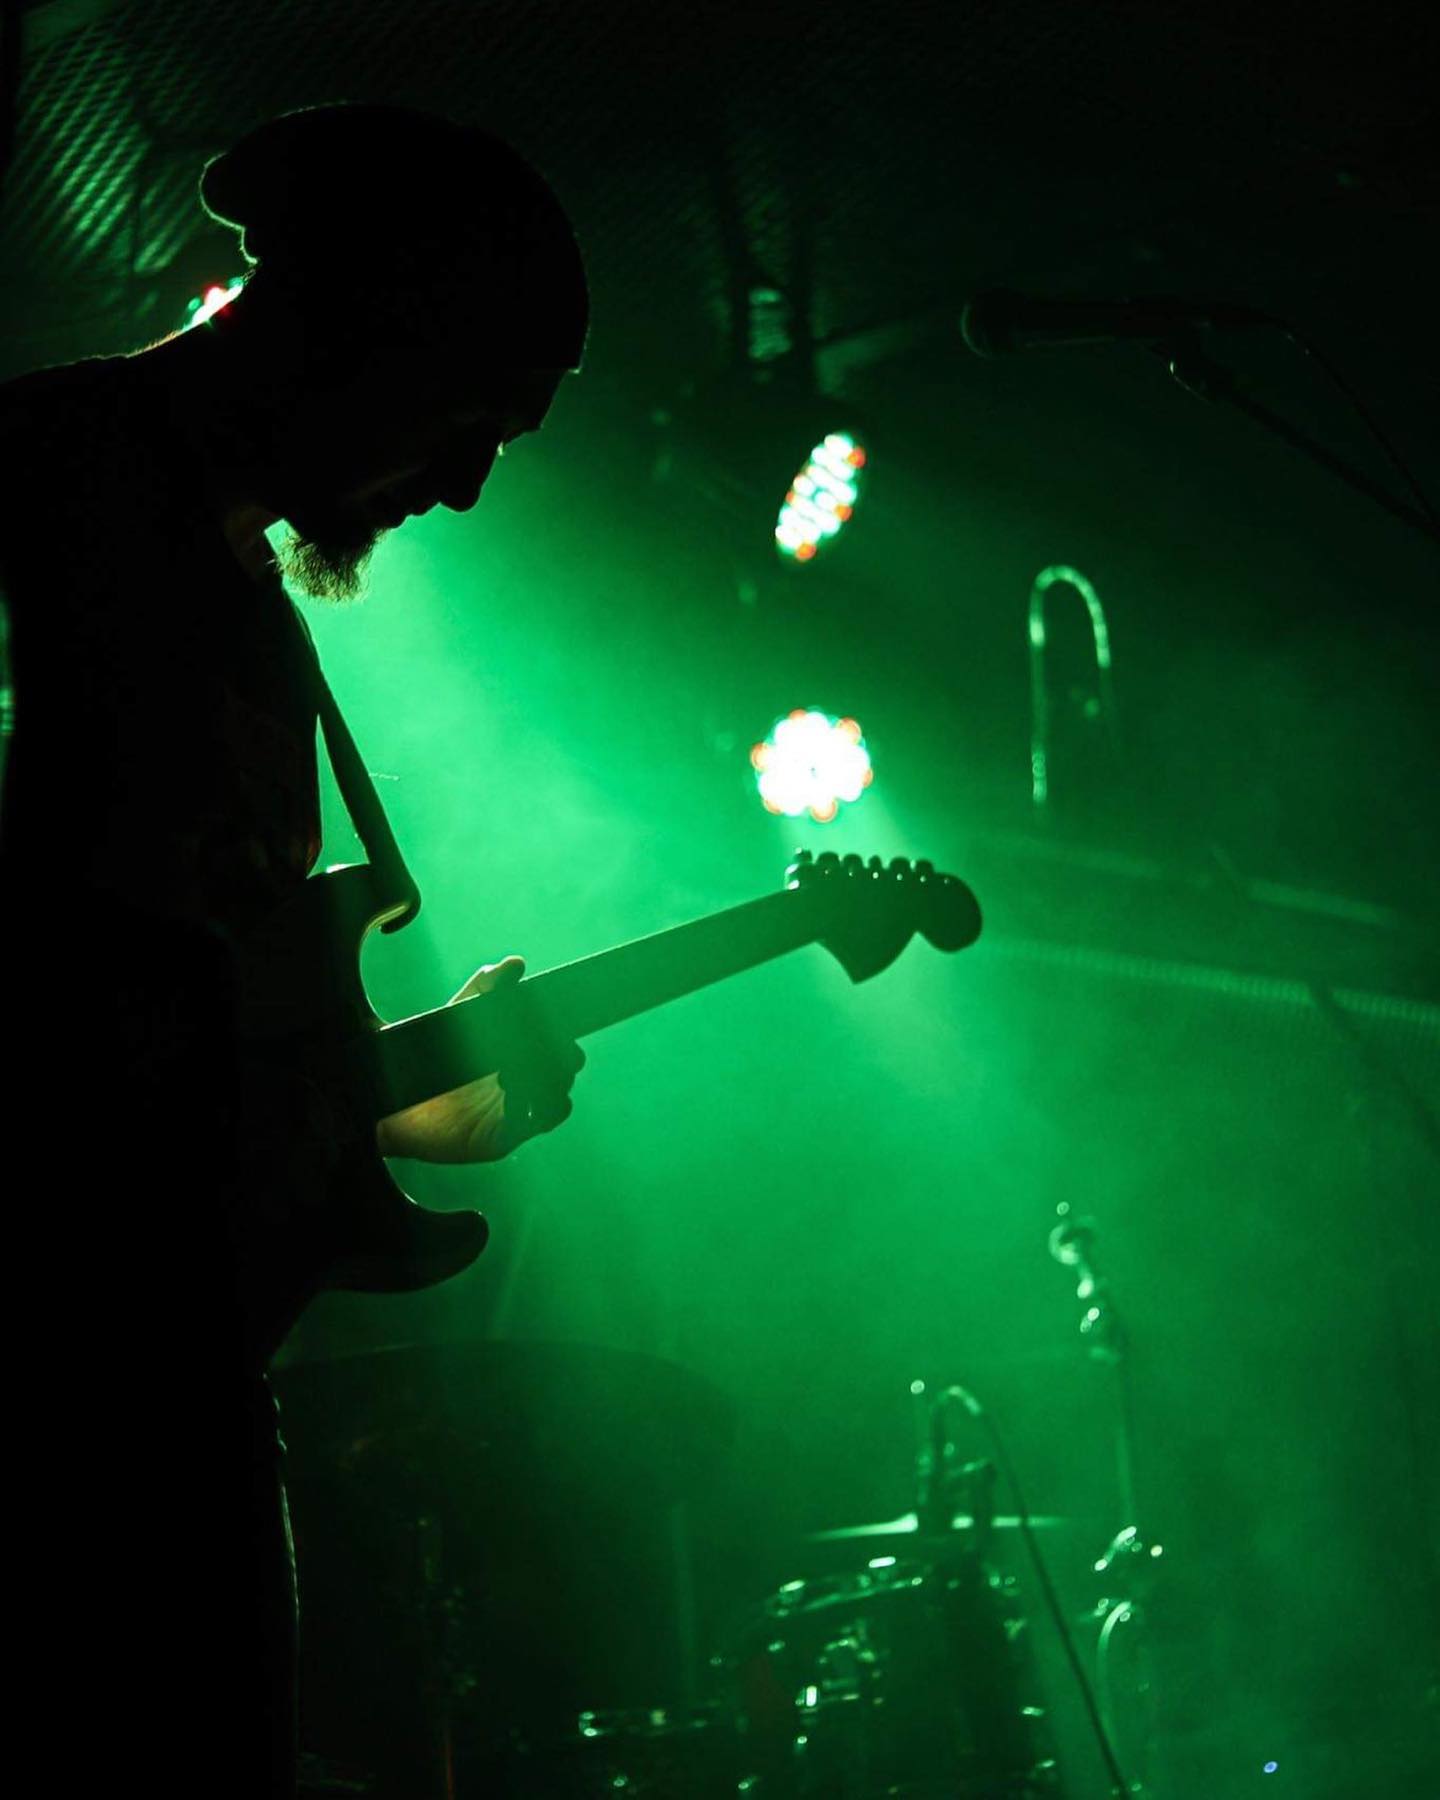 A green-tinted silhouette of Moe live on stage